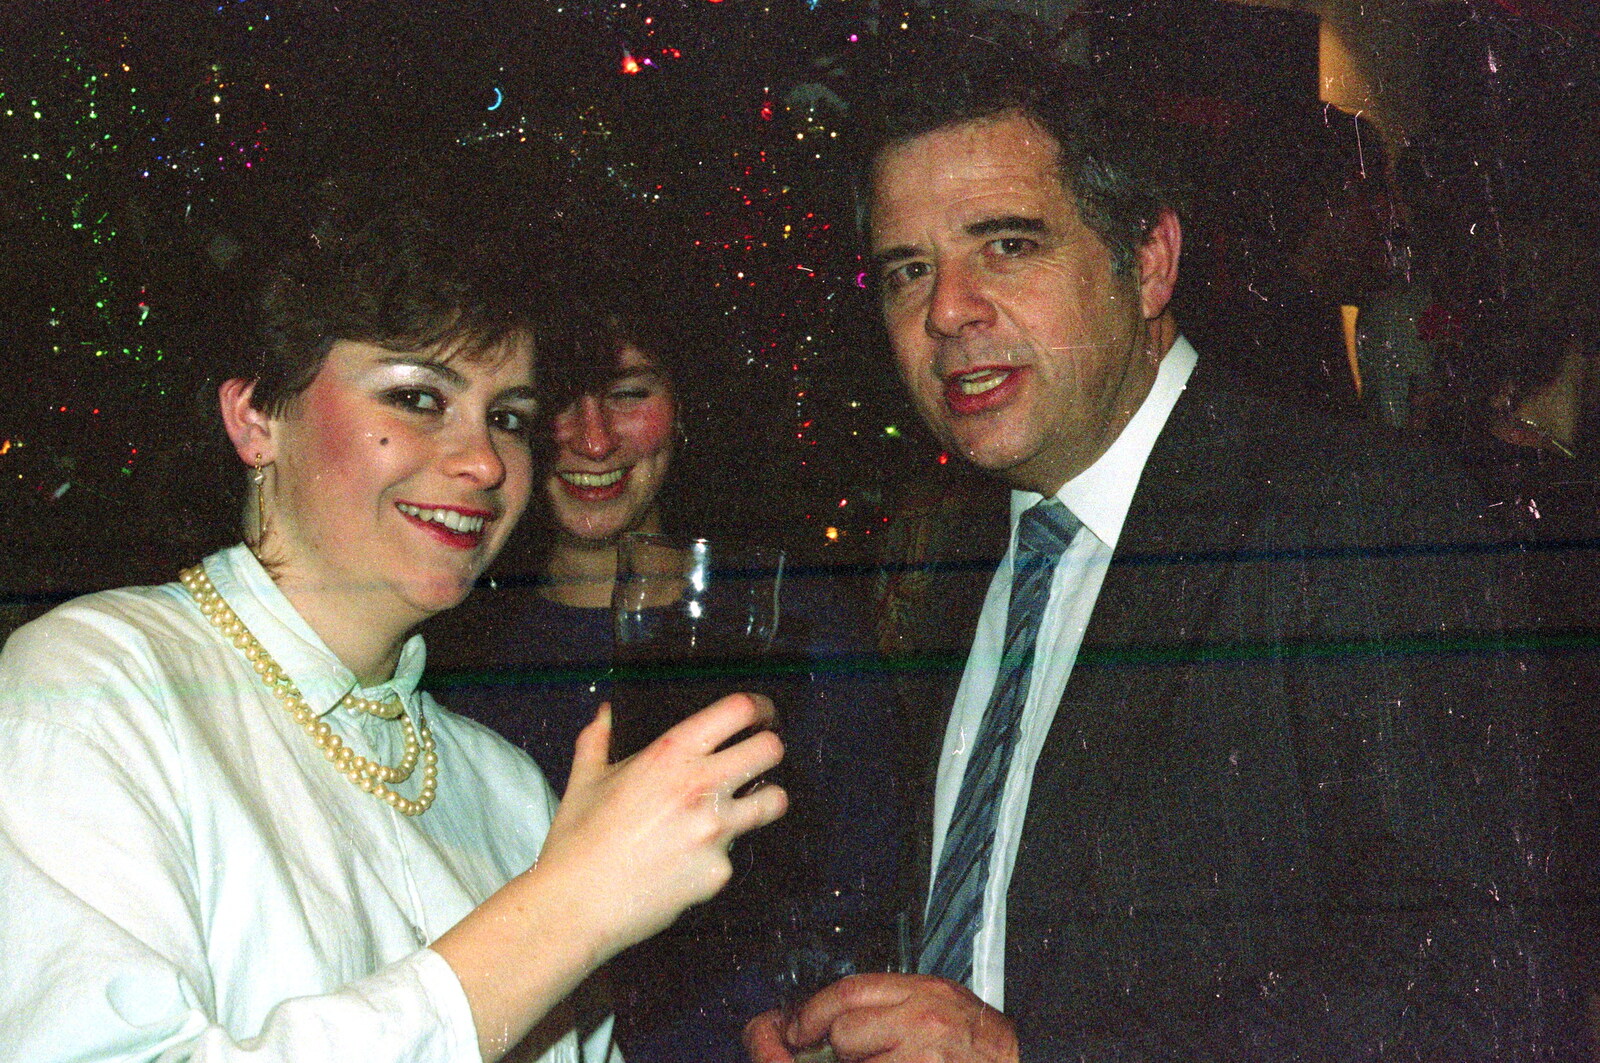 Brian Smith and an 80s girl from Uni: The Fly Christmas Party and BABS Panto, Plymouth Polytechnic, Devon - December 11th 1985